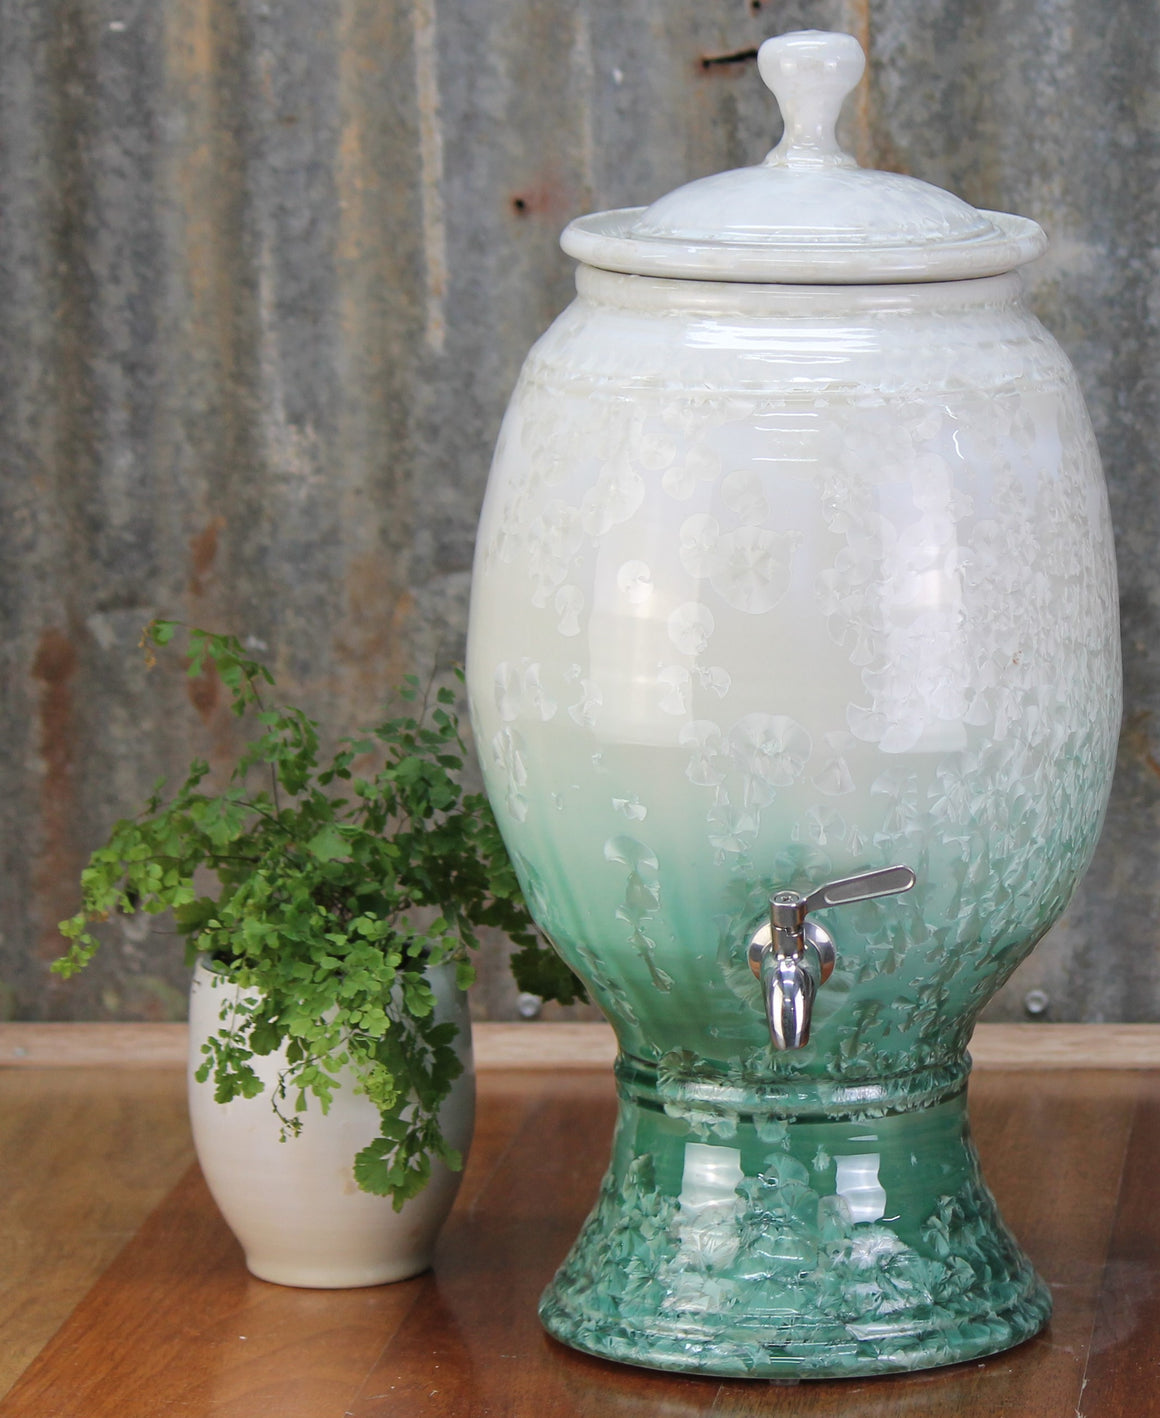 Crystalline Green & White Ceramic Water Filter - Peter Wallace Pottery